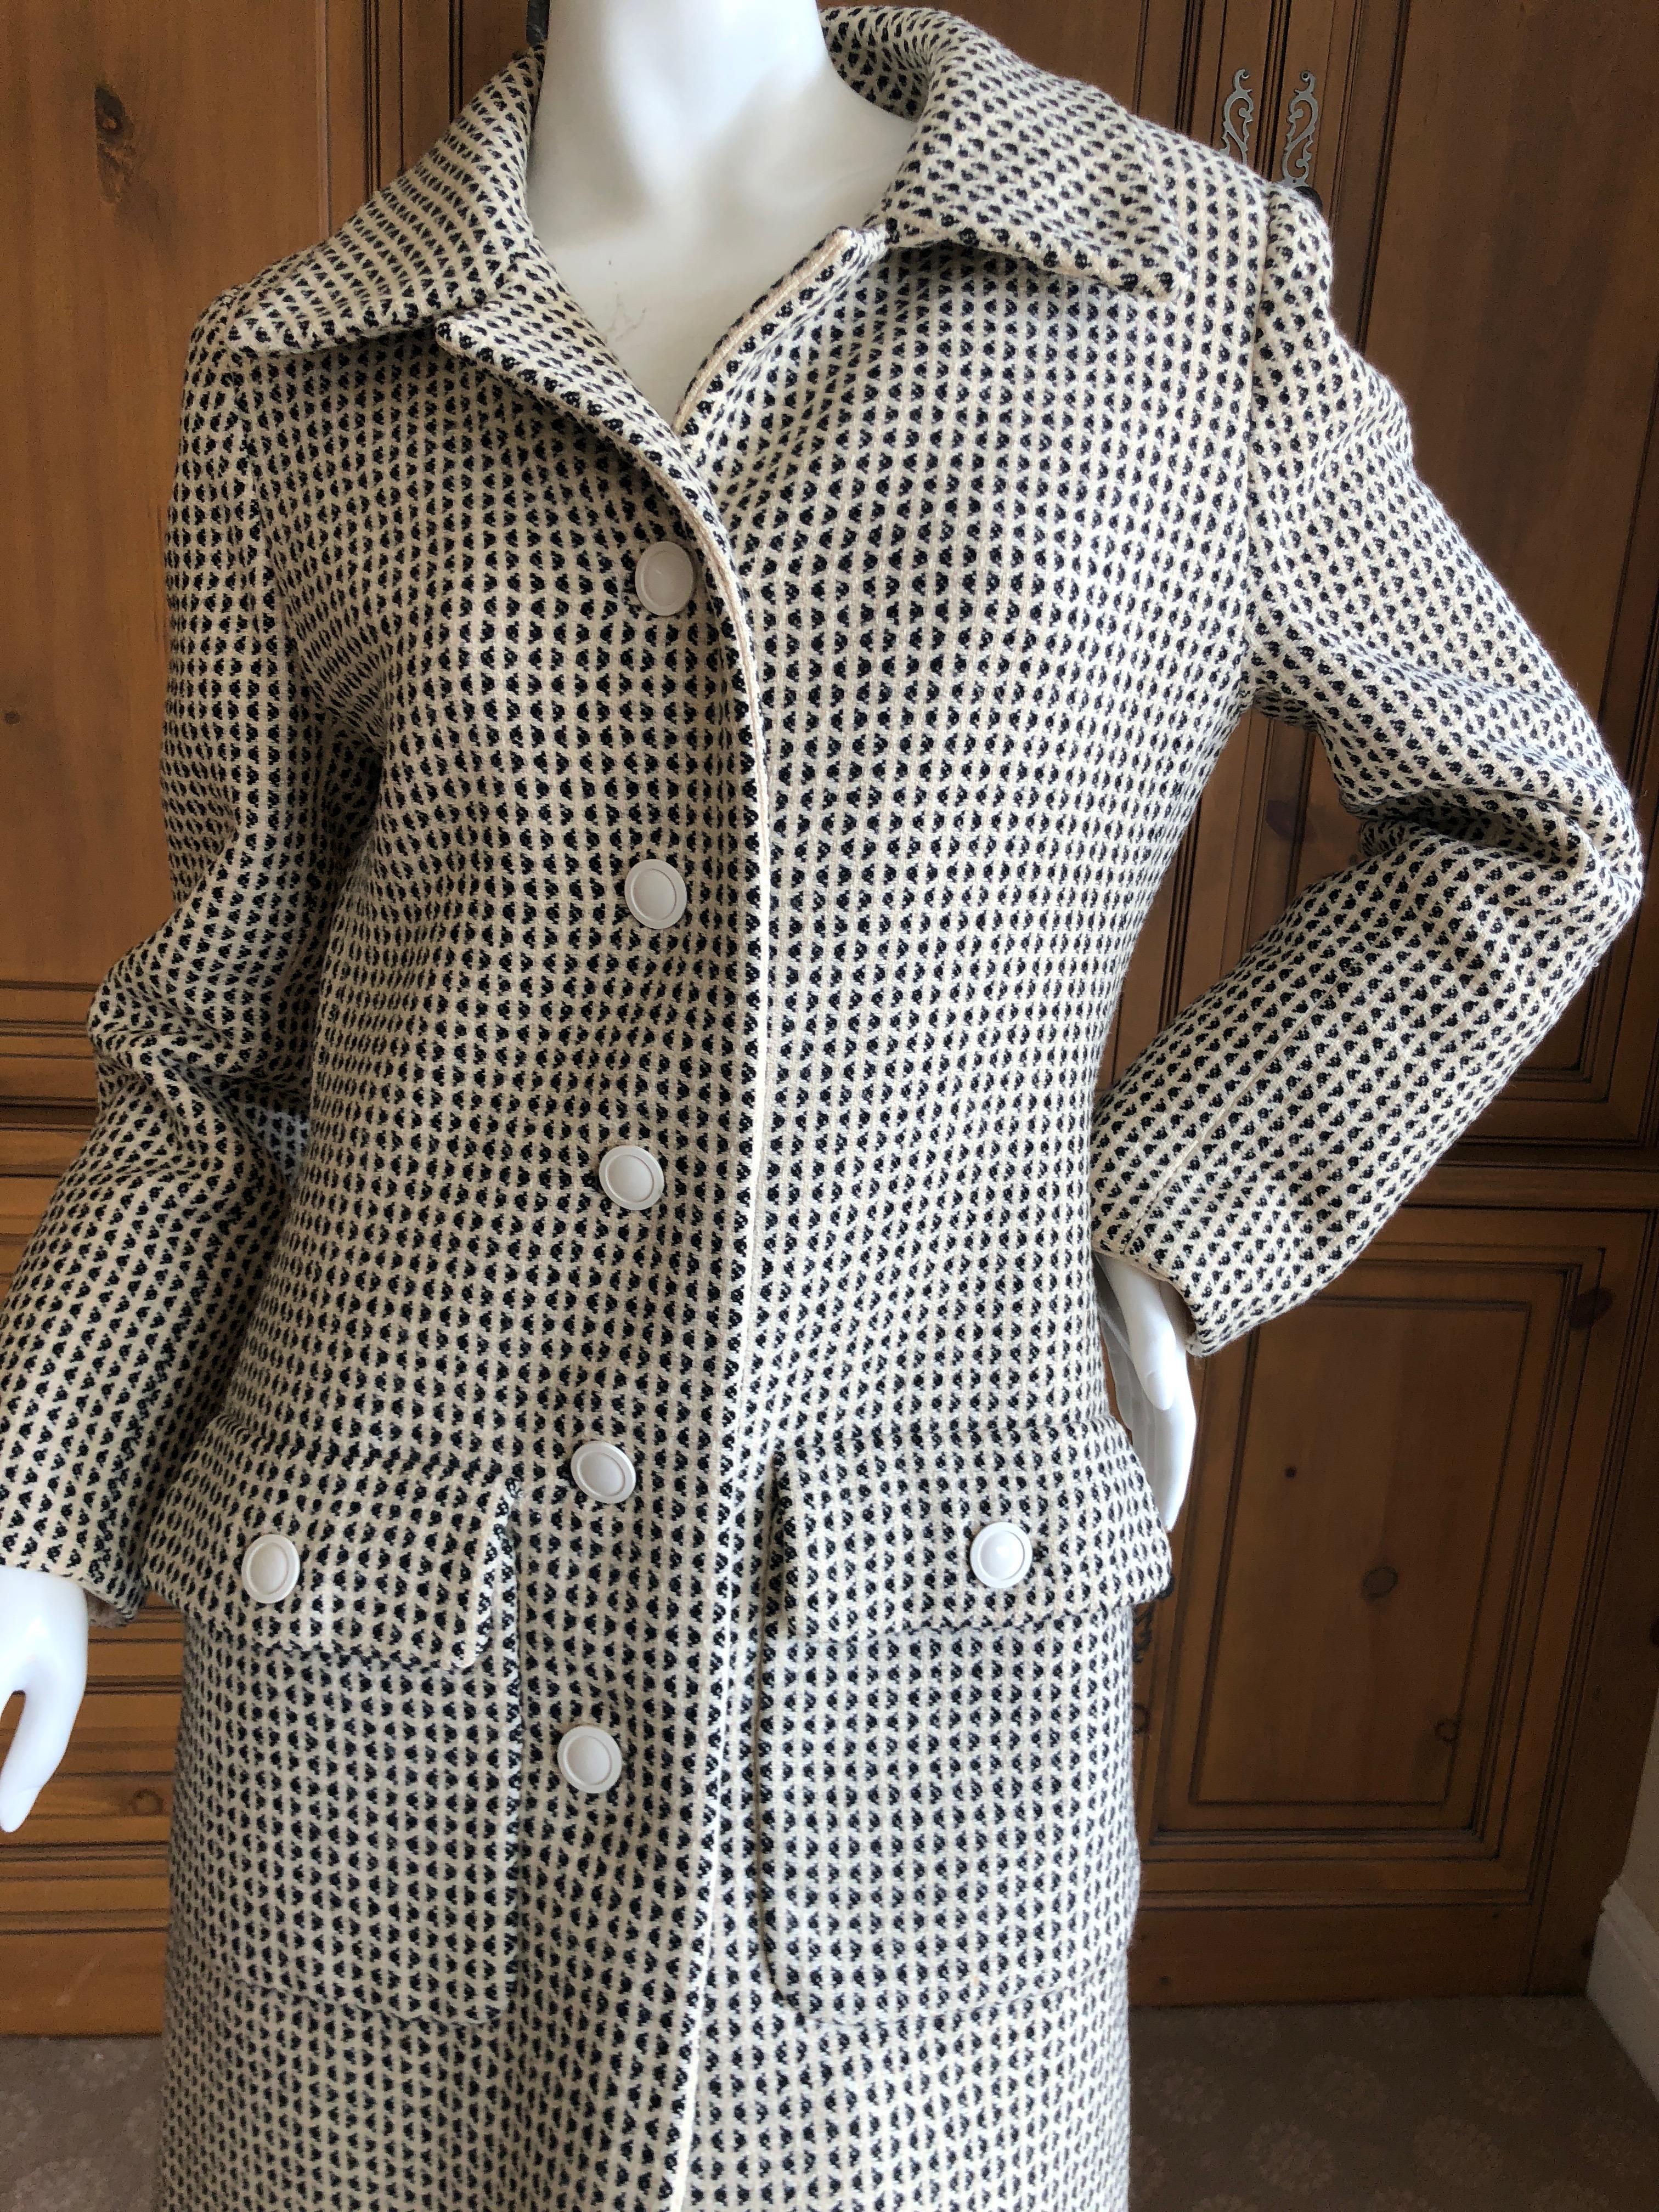 Galanos Vintage 1969 Check Wool Coat
Bust 38